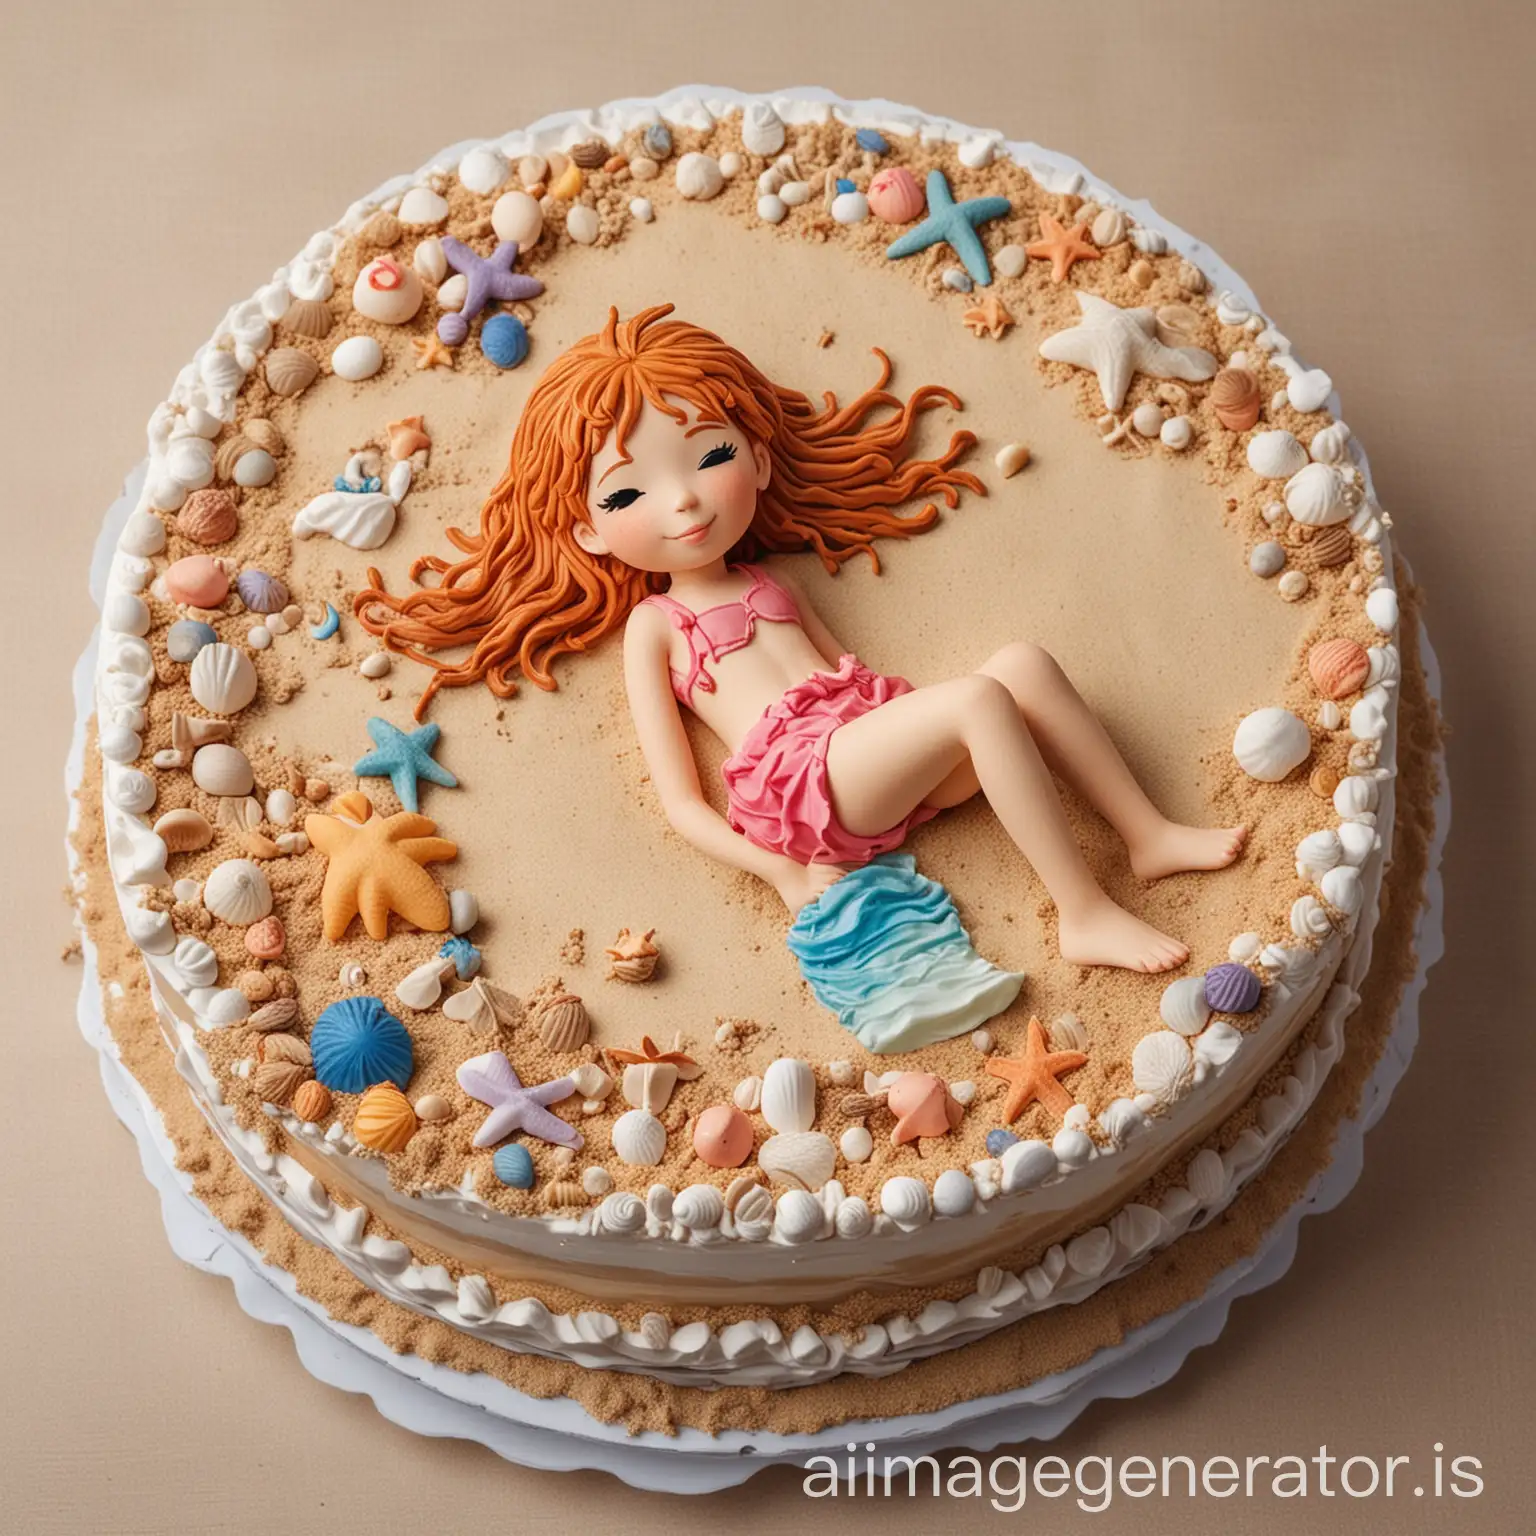 A cake in the shape of a girl lying in the beach